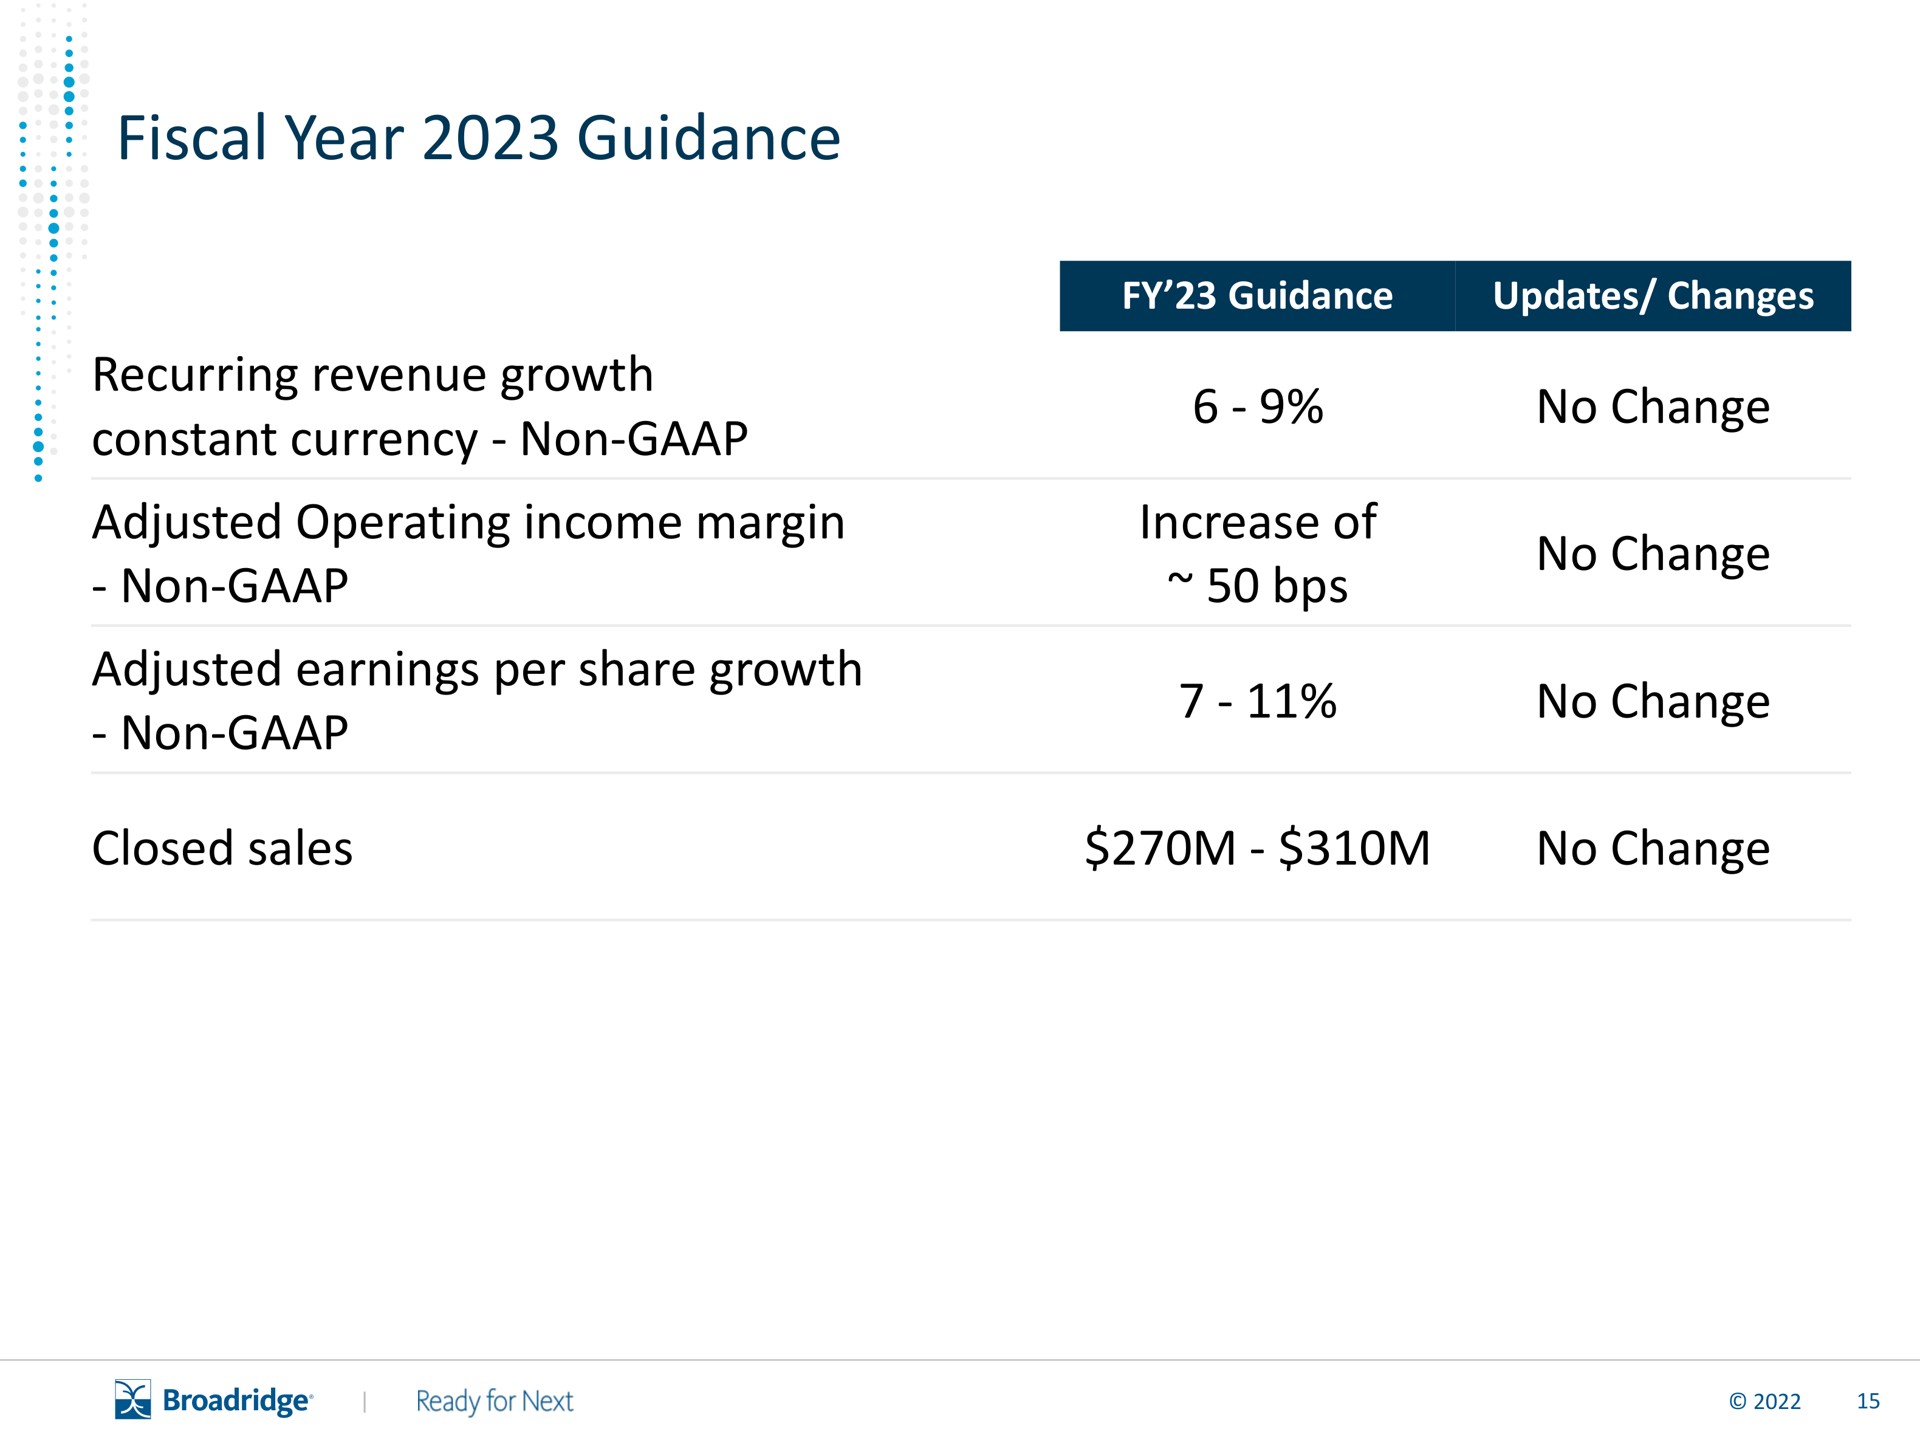 fiscal year guidance recurring revenue growth constant currency non adjusted operating income margin non adjusted earnings per share growth non no change increase of no change no change closed sales no change | Broadridge Financial Solutions